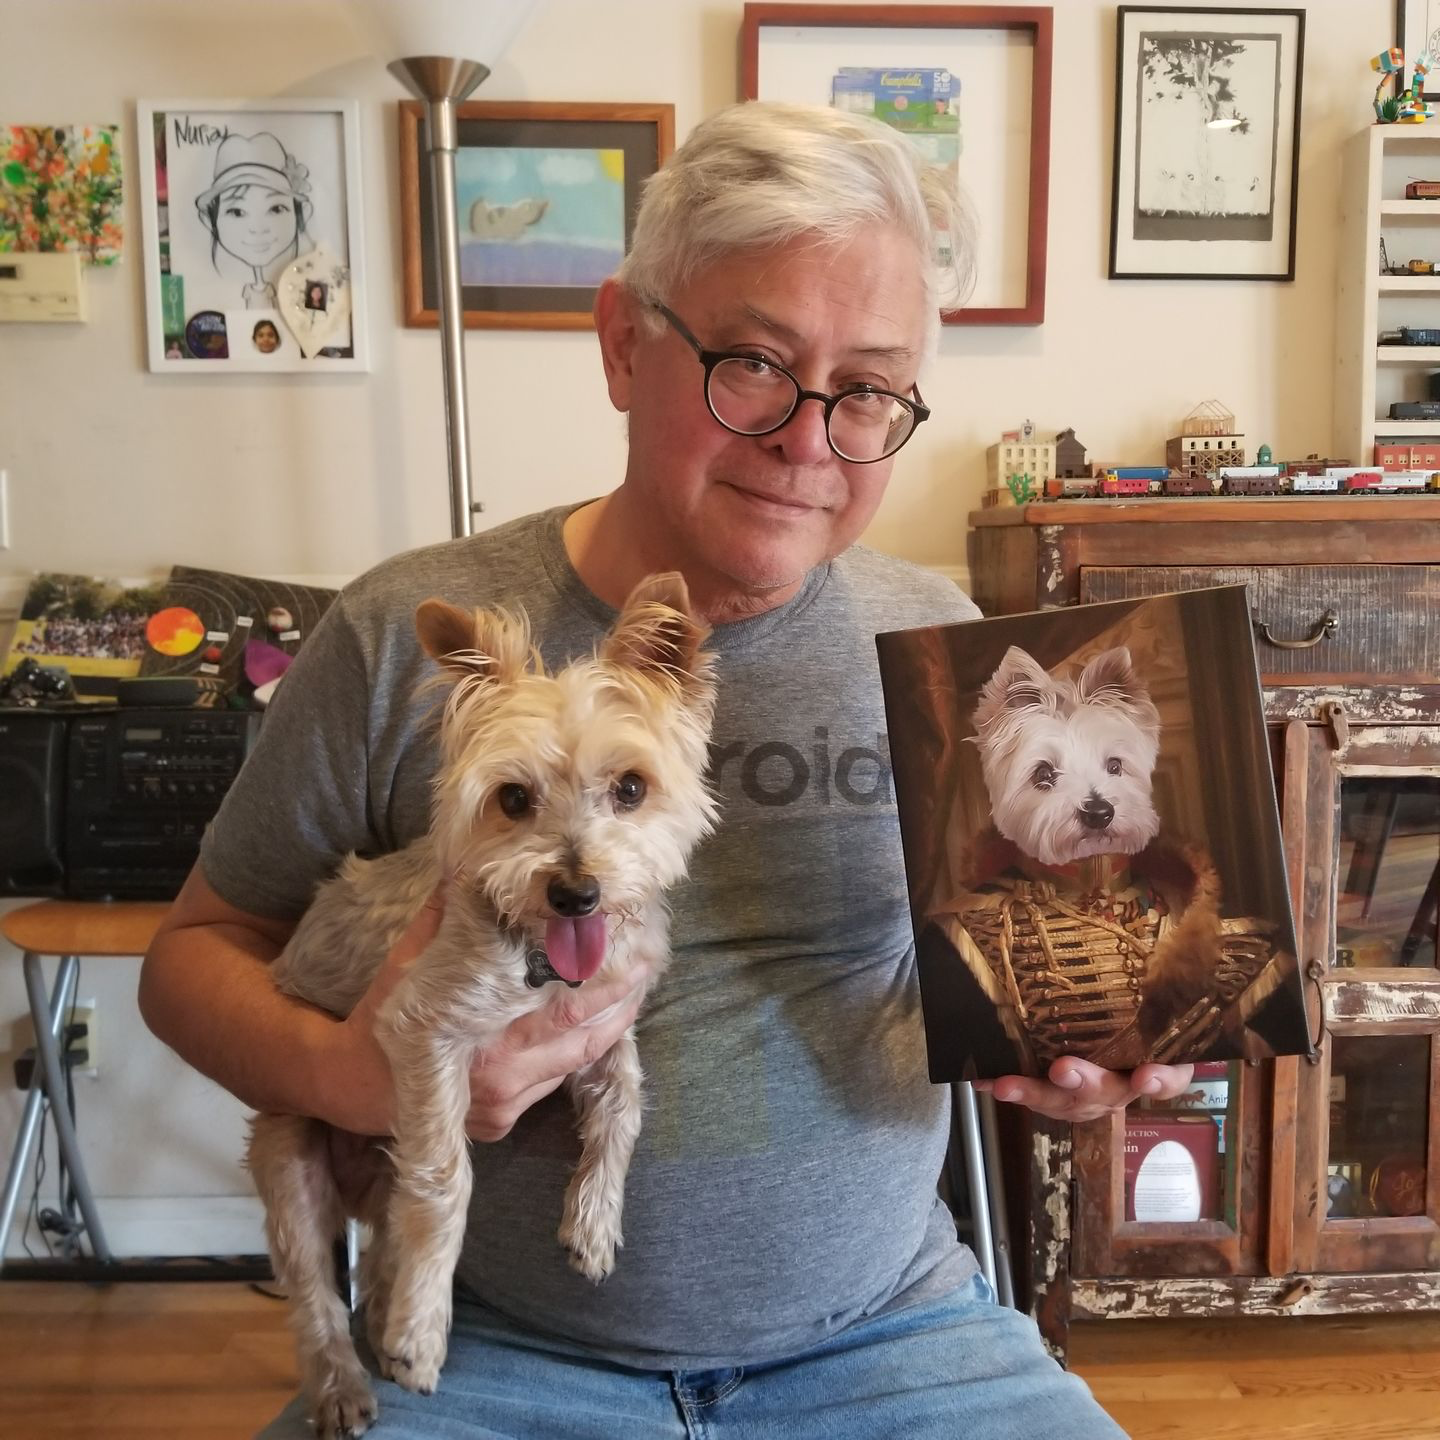 pawandglory, paw and glory, crown and paw, westandwillow painted portraits of dogs, portraits pets, portrait of your pet, portrait of your dog, pet photo studio, pet portrait painters, portrait pet,